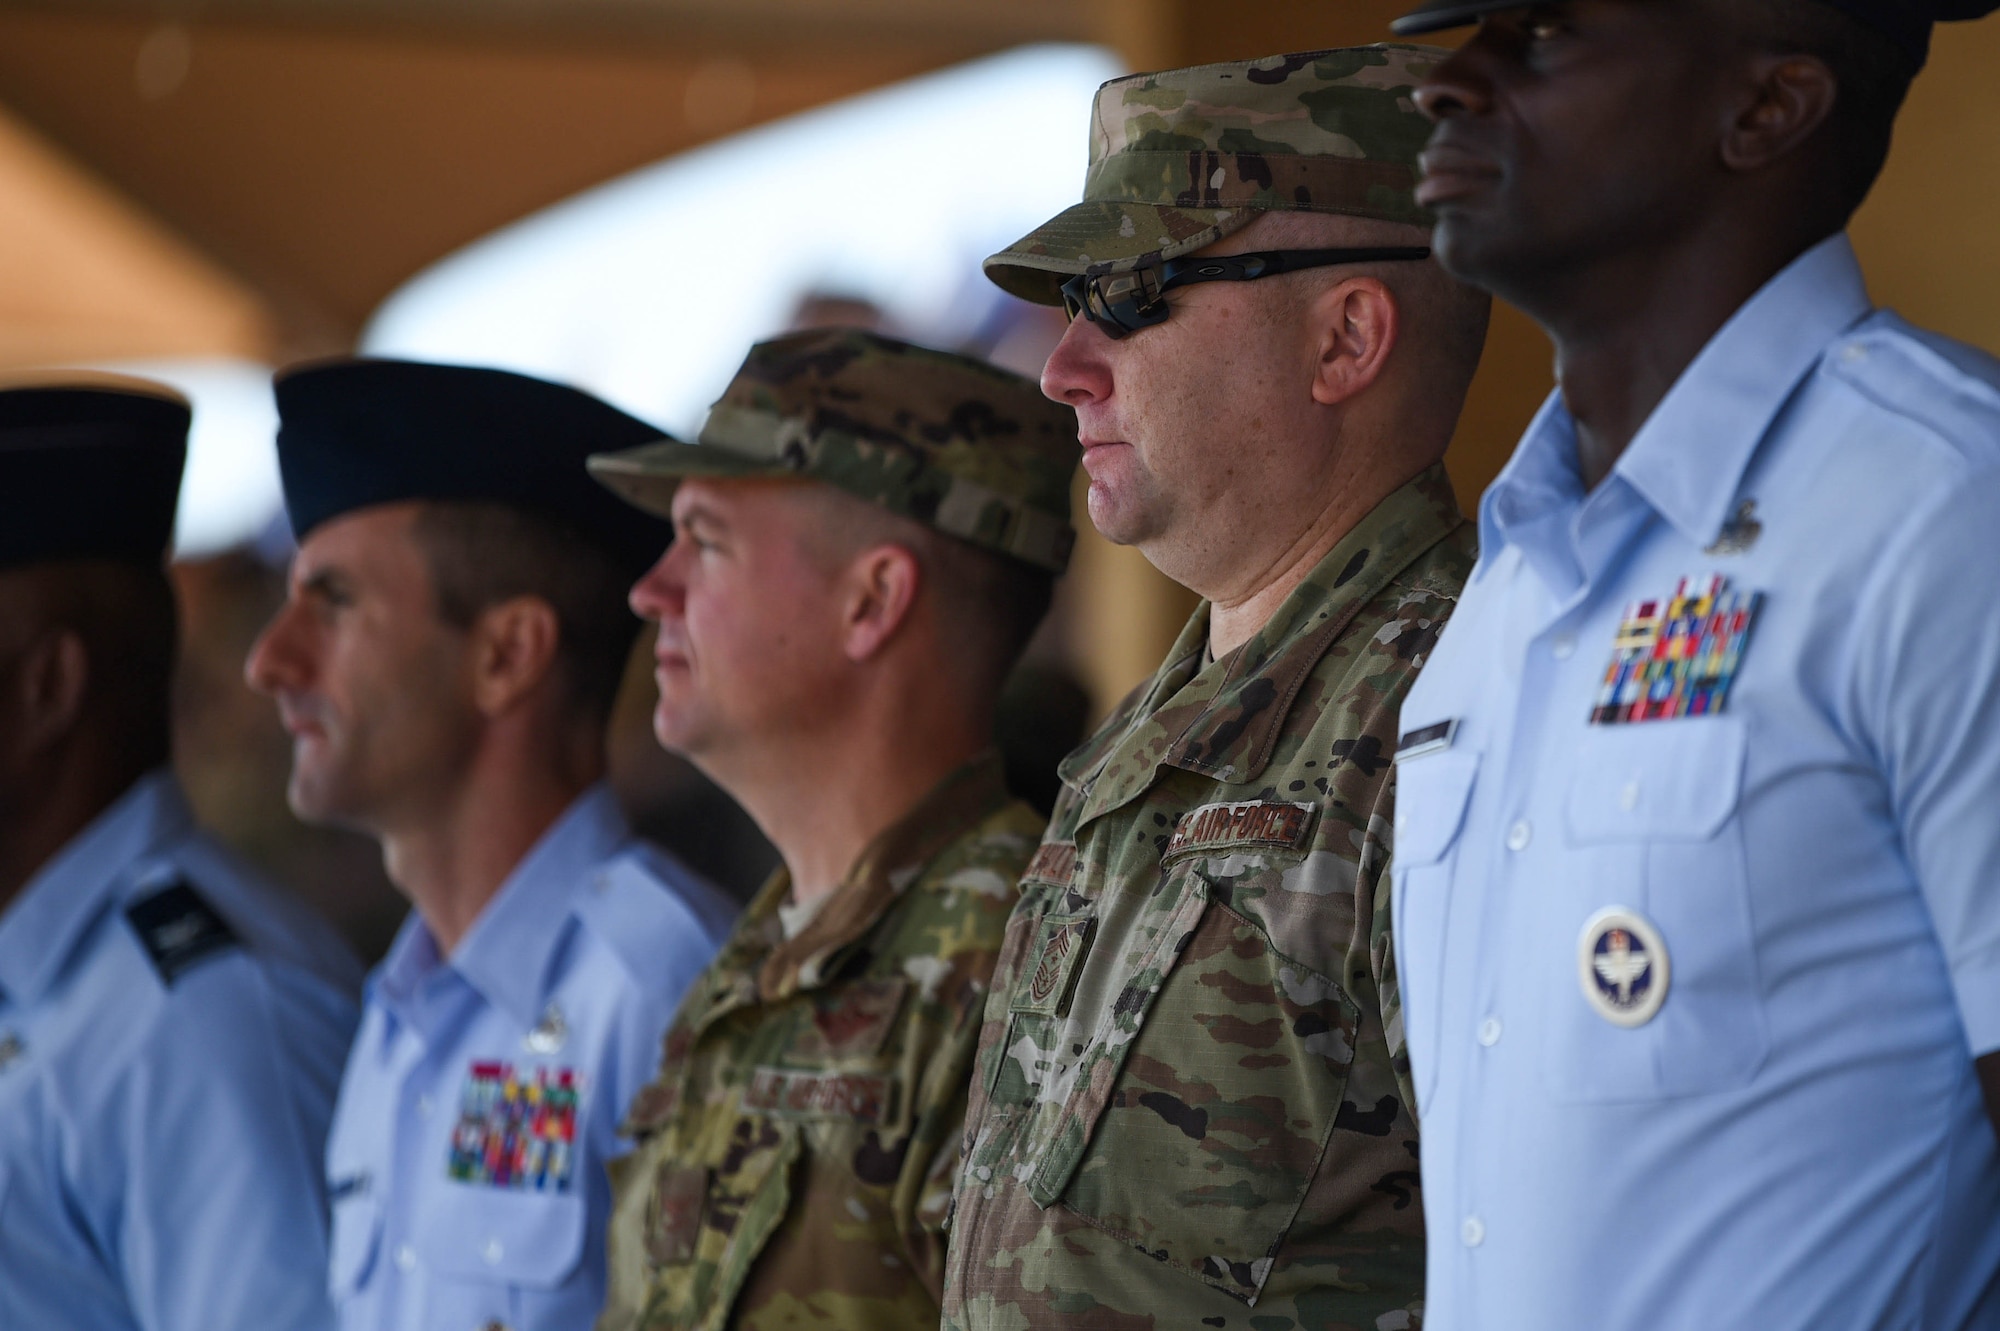 Col. Scovill Currin, 62nd Airlift Wing commander, second from left, and Chief Master Sgt. Rob Schultz, 62nd Airlift Wing command chief, third from left, observe a basic military training graduation parade on Lackland Air Force Base, Texas, Oct. 18, 2019. New basic military training graduates march in the graduation parade across the enlisted heroes walk at the end of their eight weeks of demanding training.